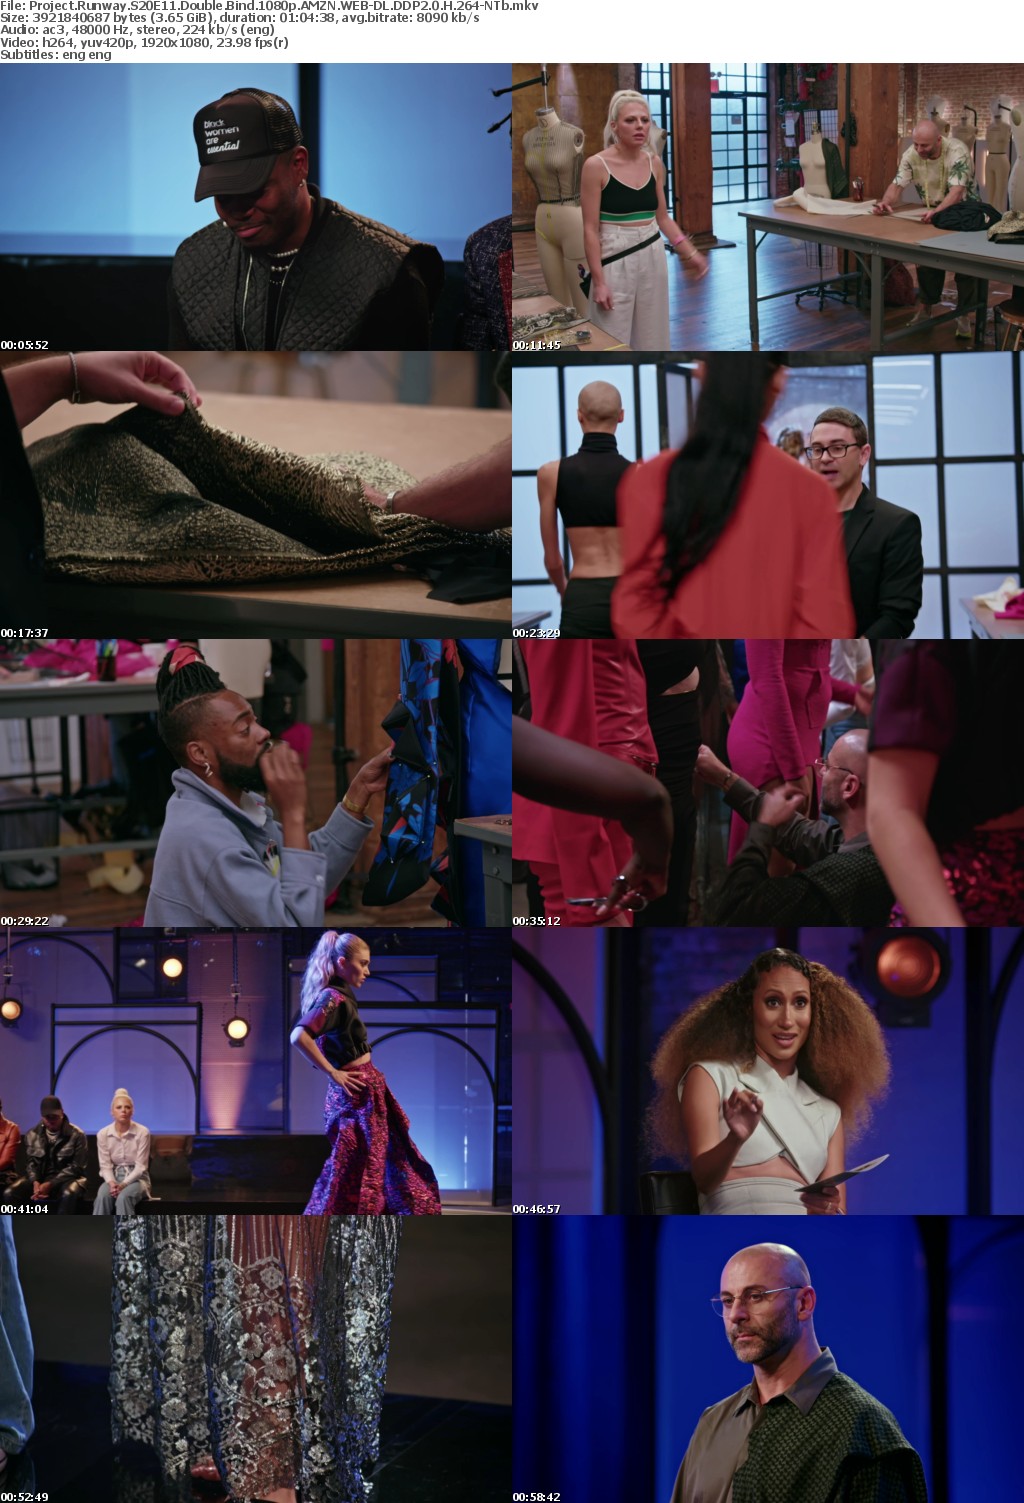 Project Runway S20E11 Double Bind 1080p AMZN WEB-DL DDP2 0 H 264-NTb